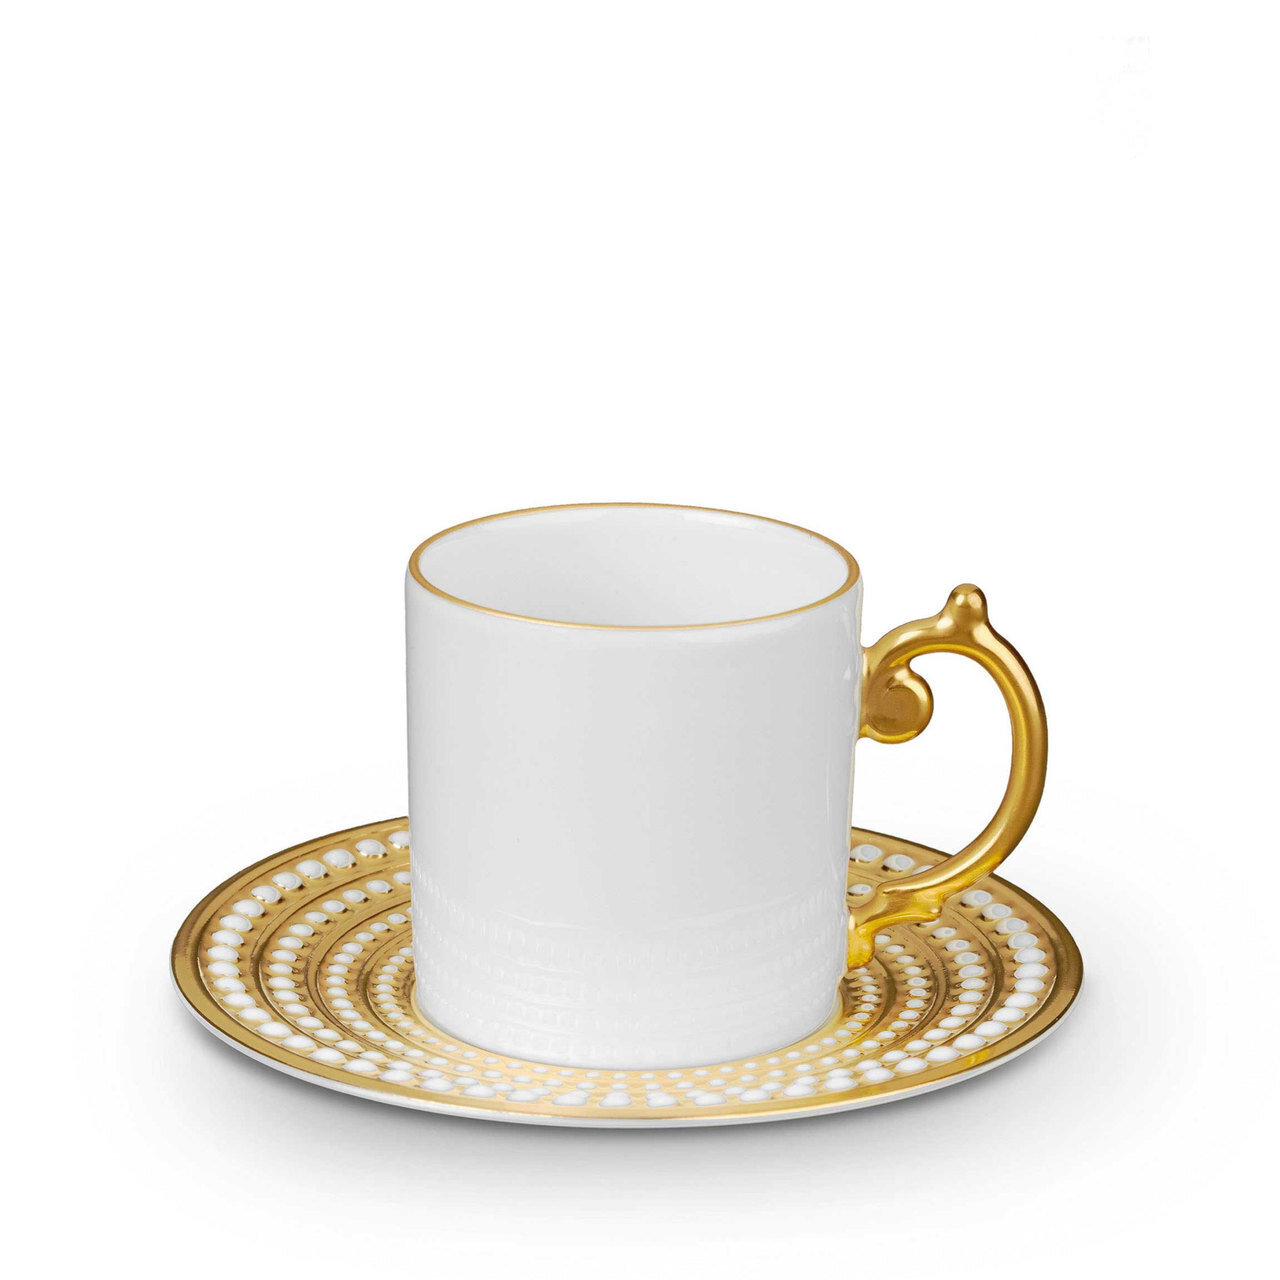 L'Objet Perlee Espresso Cup and Saucer Gold